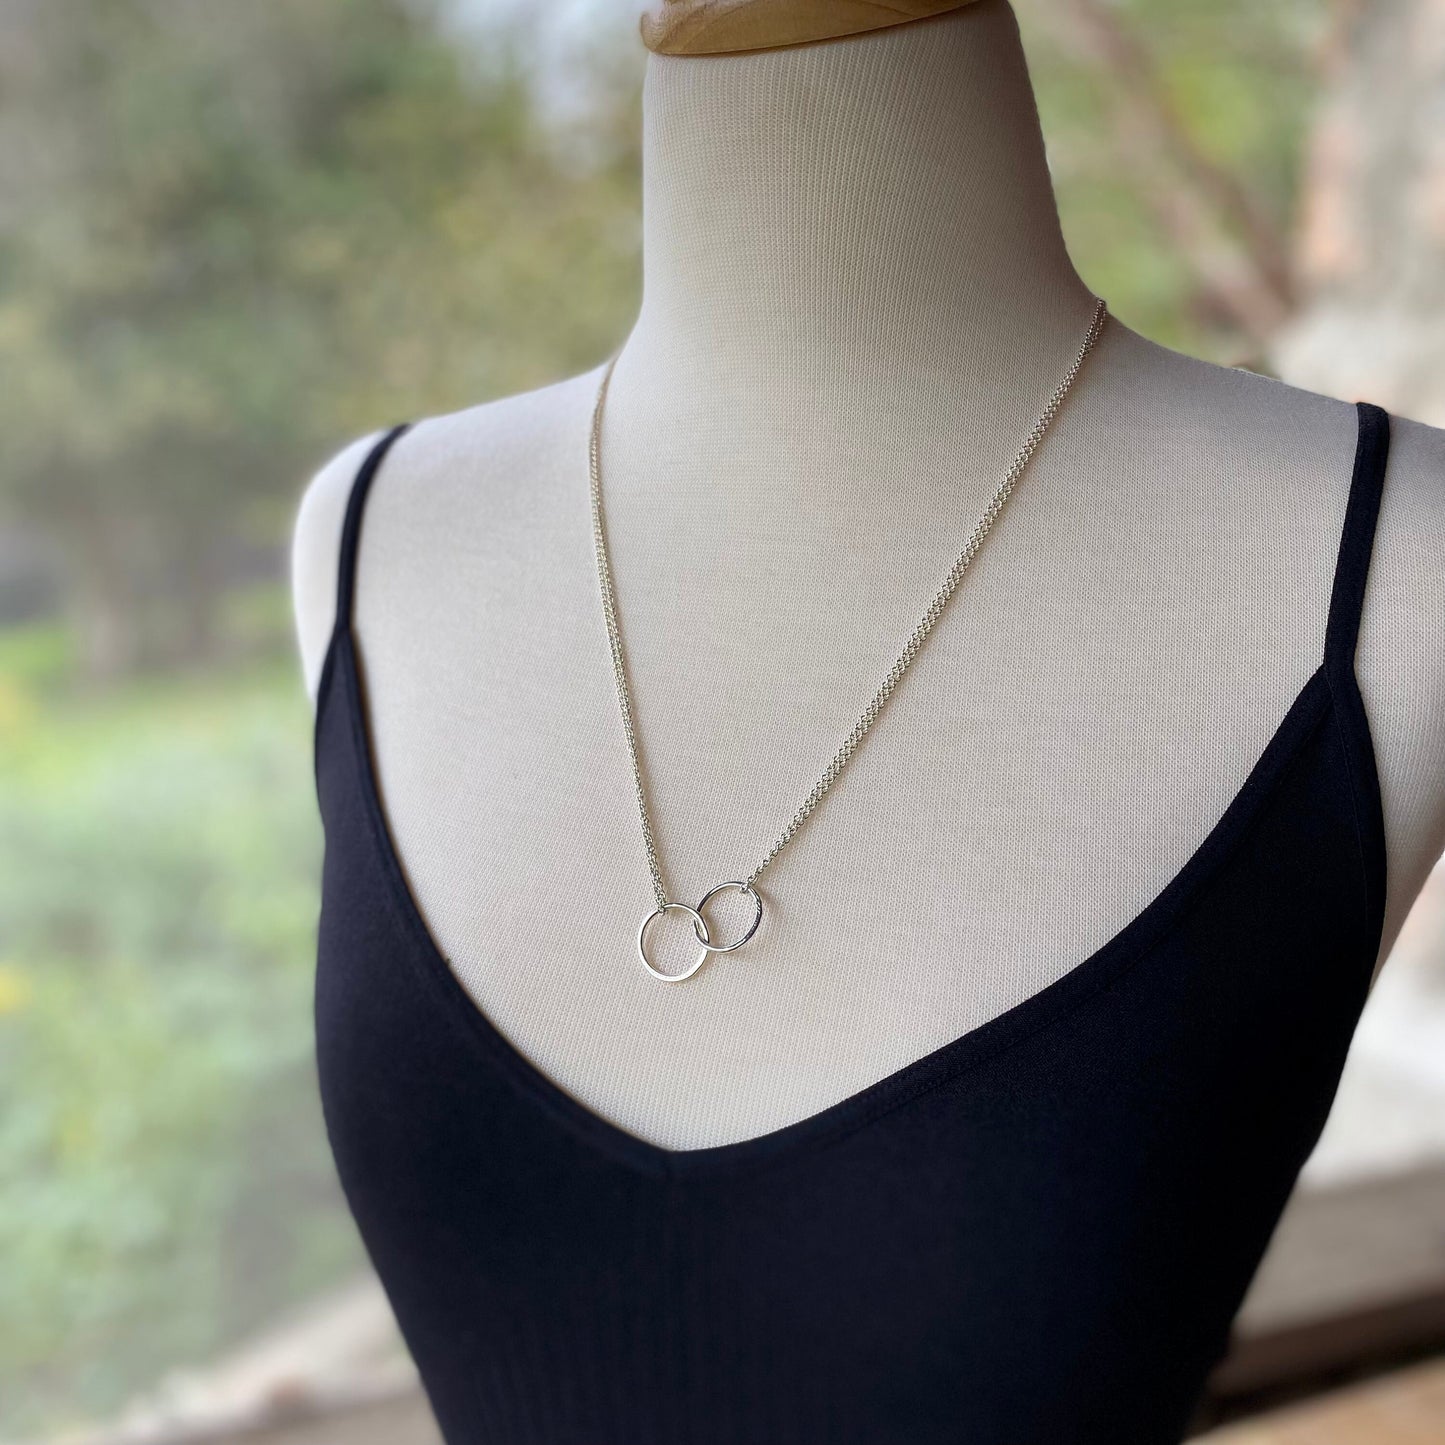 Interlocking Circle Necklace, Equally Sized Sterling Silver Infinity Necklace, 2 Connected Hammered Rings, Best Friend or Anniversary Gift